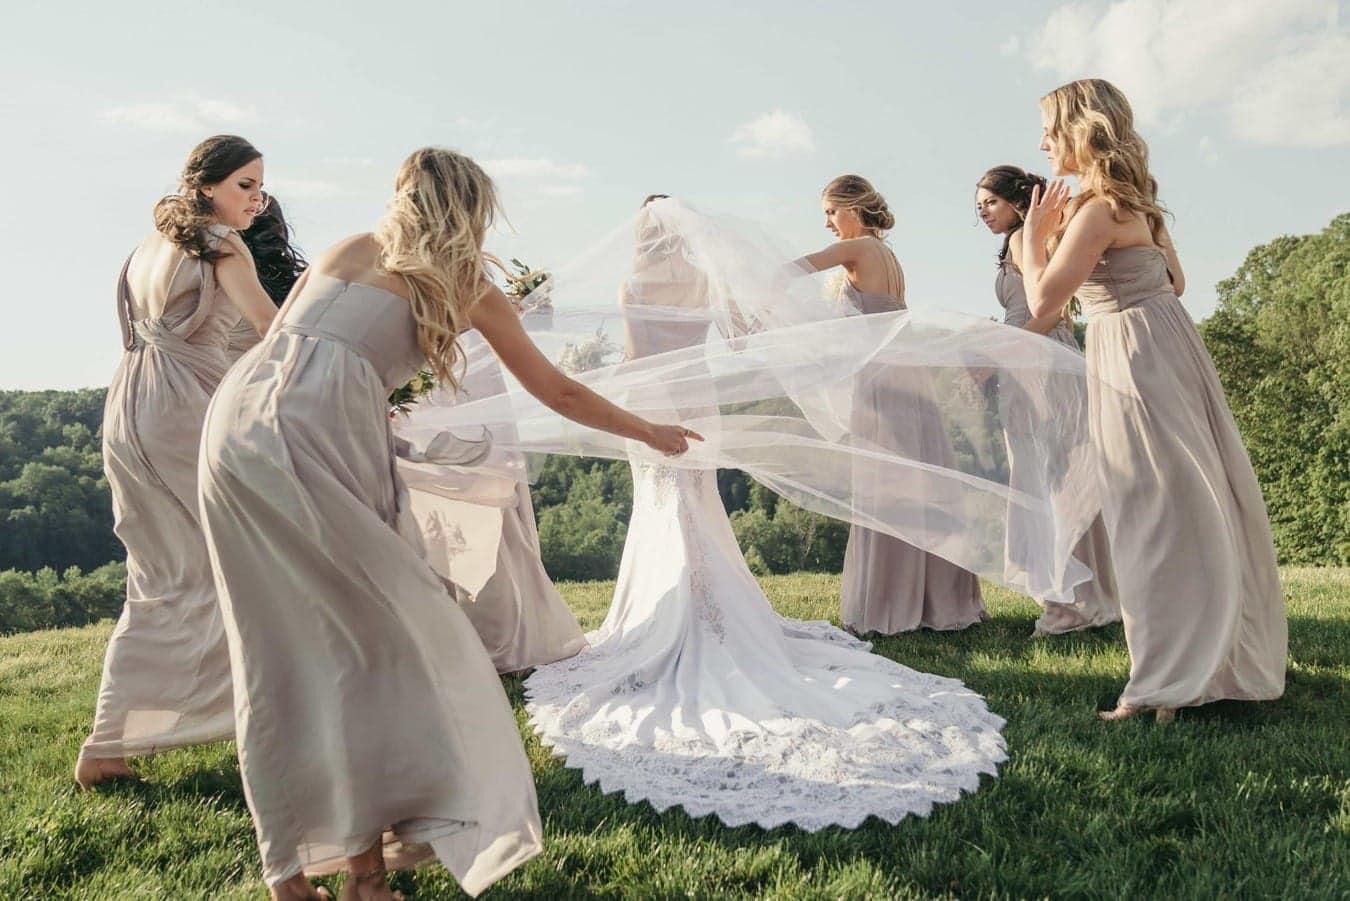 Bridesmaids circle around bride and one holds bride's veil as the wind blows it.